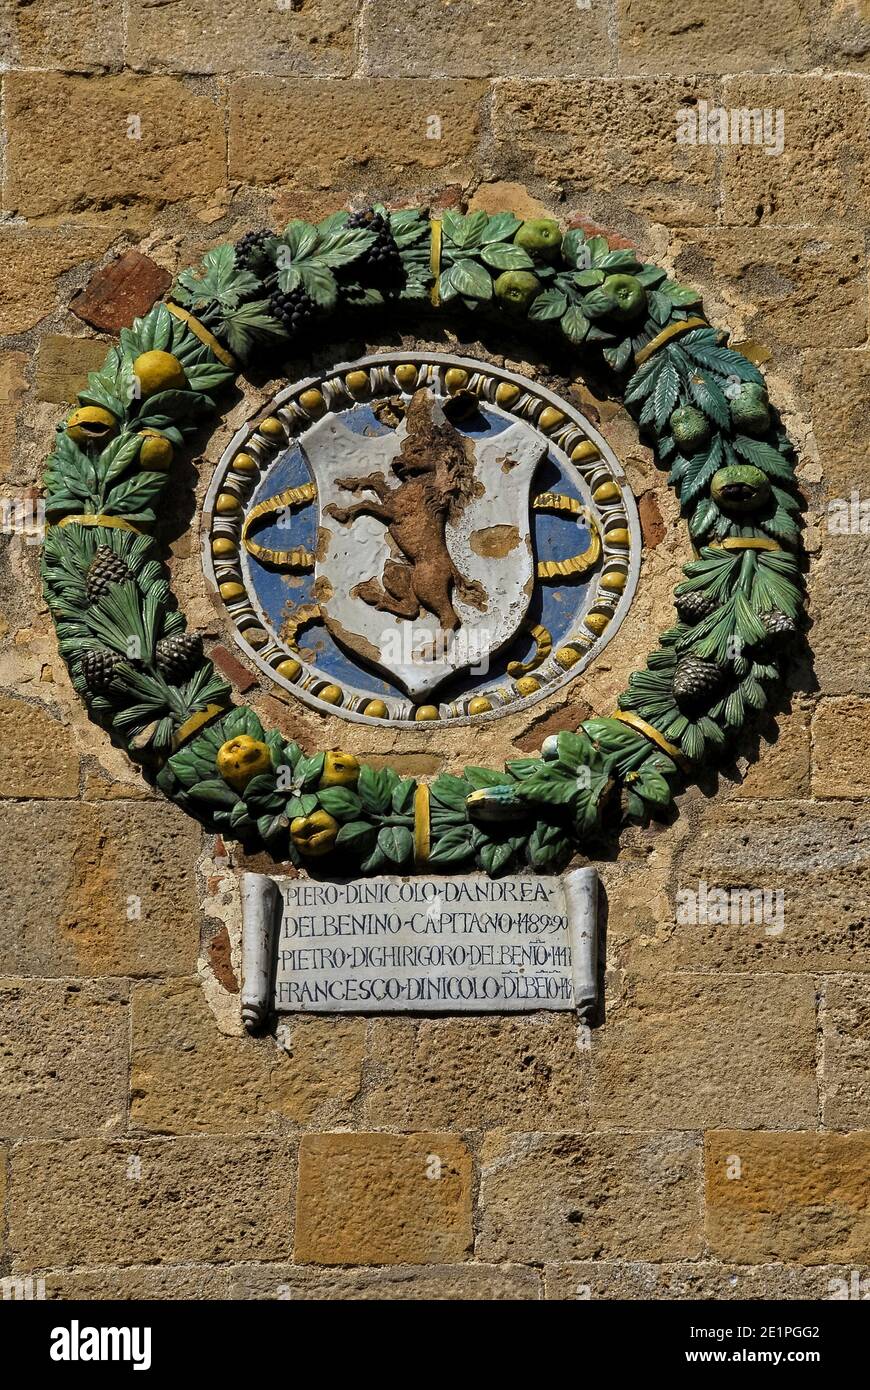 Volterra, Tuscany, Italy: enamelled terracotta medallions or plaques bearing the arms of Florentine commissioners, such as this example of 1489 for Piero di Niccolò d'Andrea del Benino, stud the Piazza dei Priori façade of Palazzo Pretorio, the oldest town hall in Tuscany.  The building, founded in 1208, was once Volterra’s seat of civic, judicial and military power.  The plaques are a reminder of how, in the late 1400s, Florence’s Medici rulers ruthlessly crushed any lingering hopes still held by Volterra that it could retain a degree of independence. Stock Photo